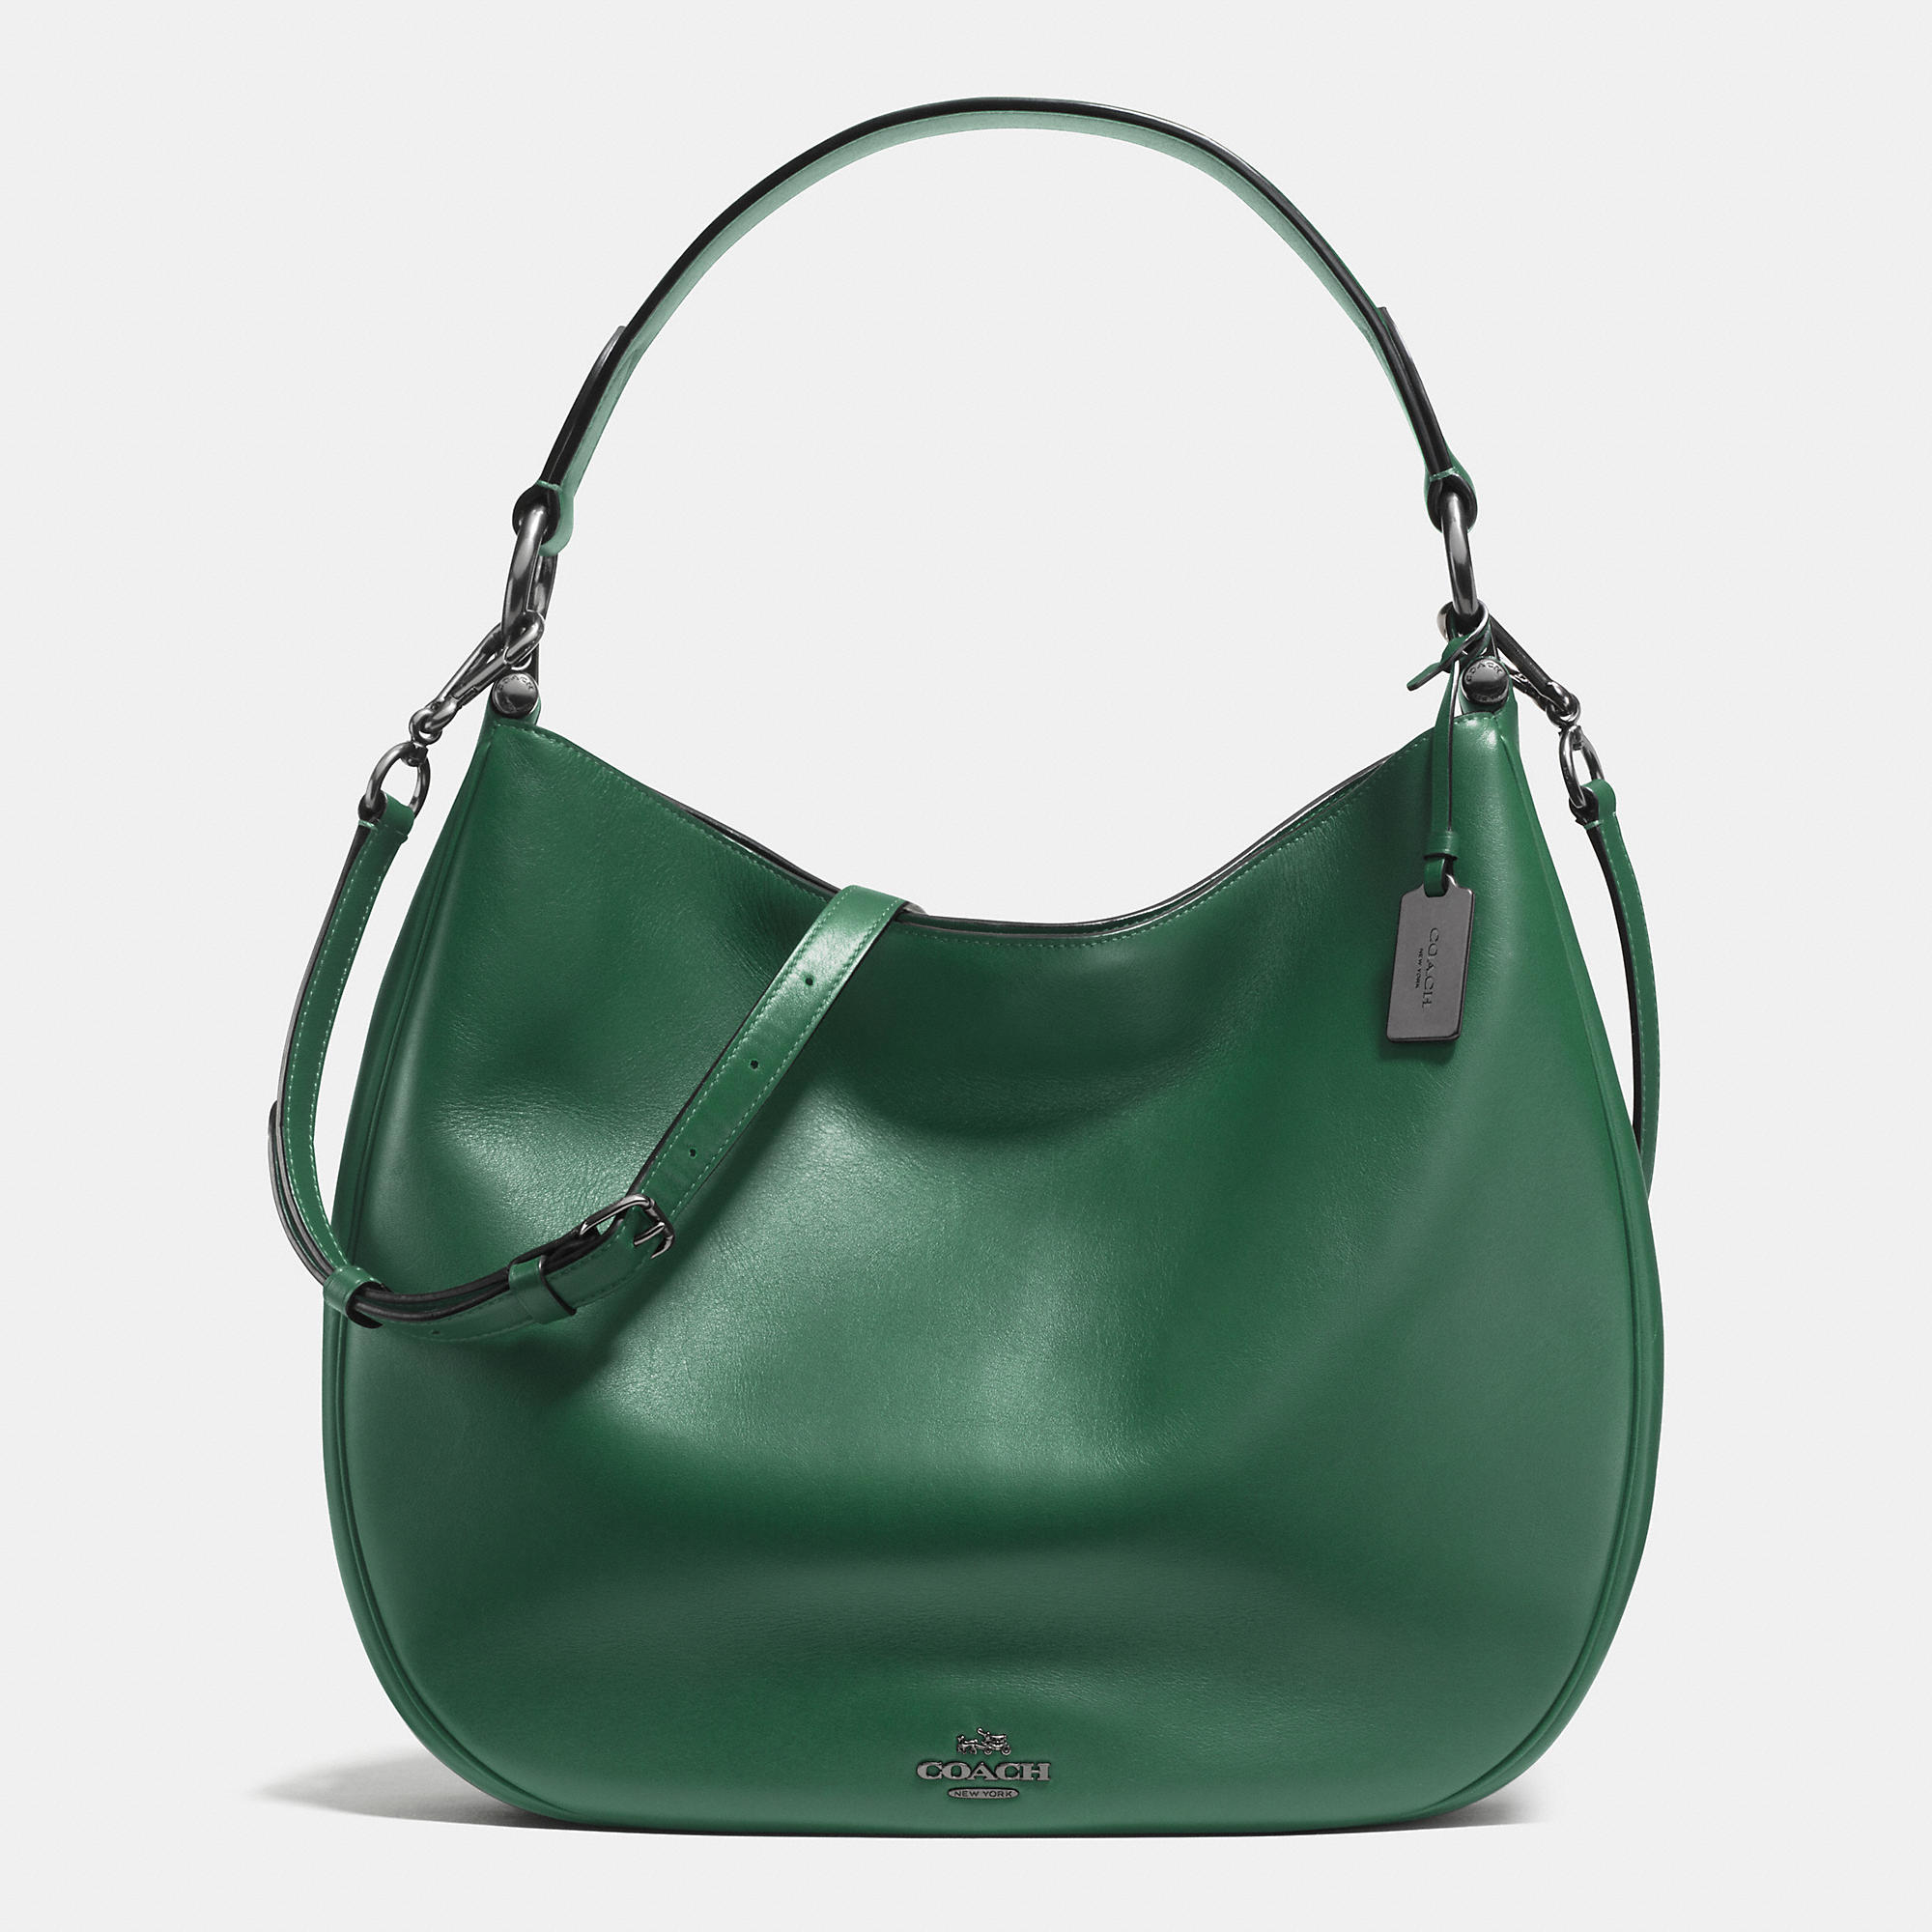 Lyst - Coach Nomad Hobo In Glovetanned Leather in Green